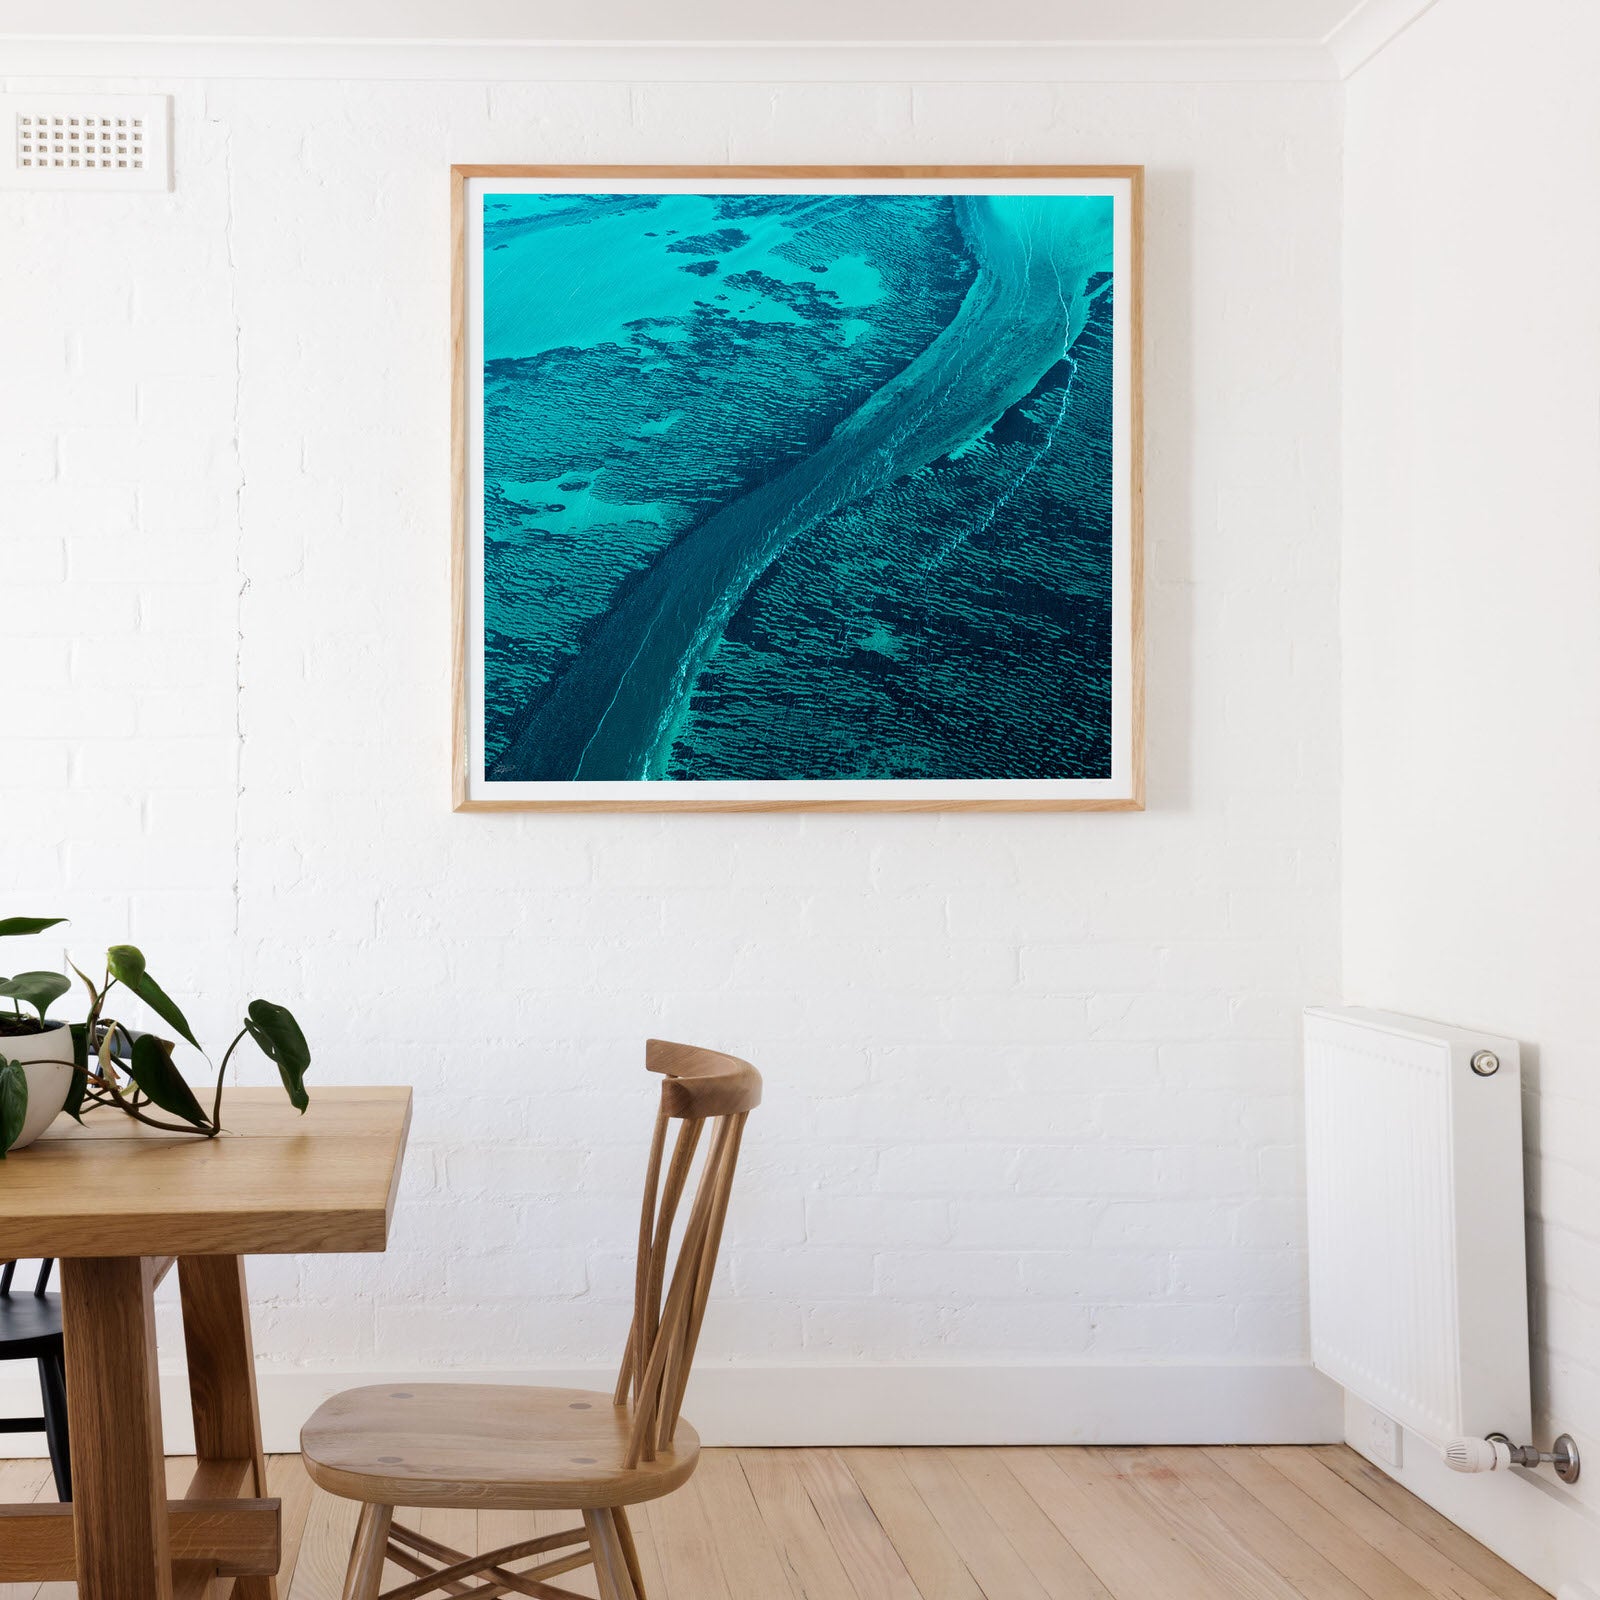 Square fine art print of reef with blue and green